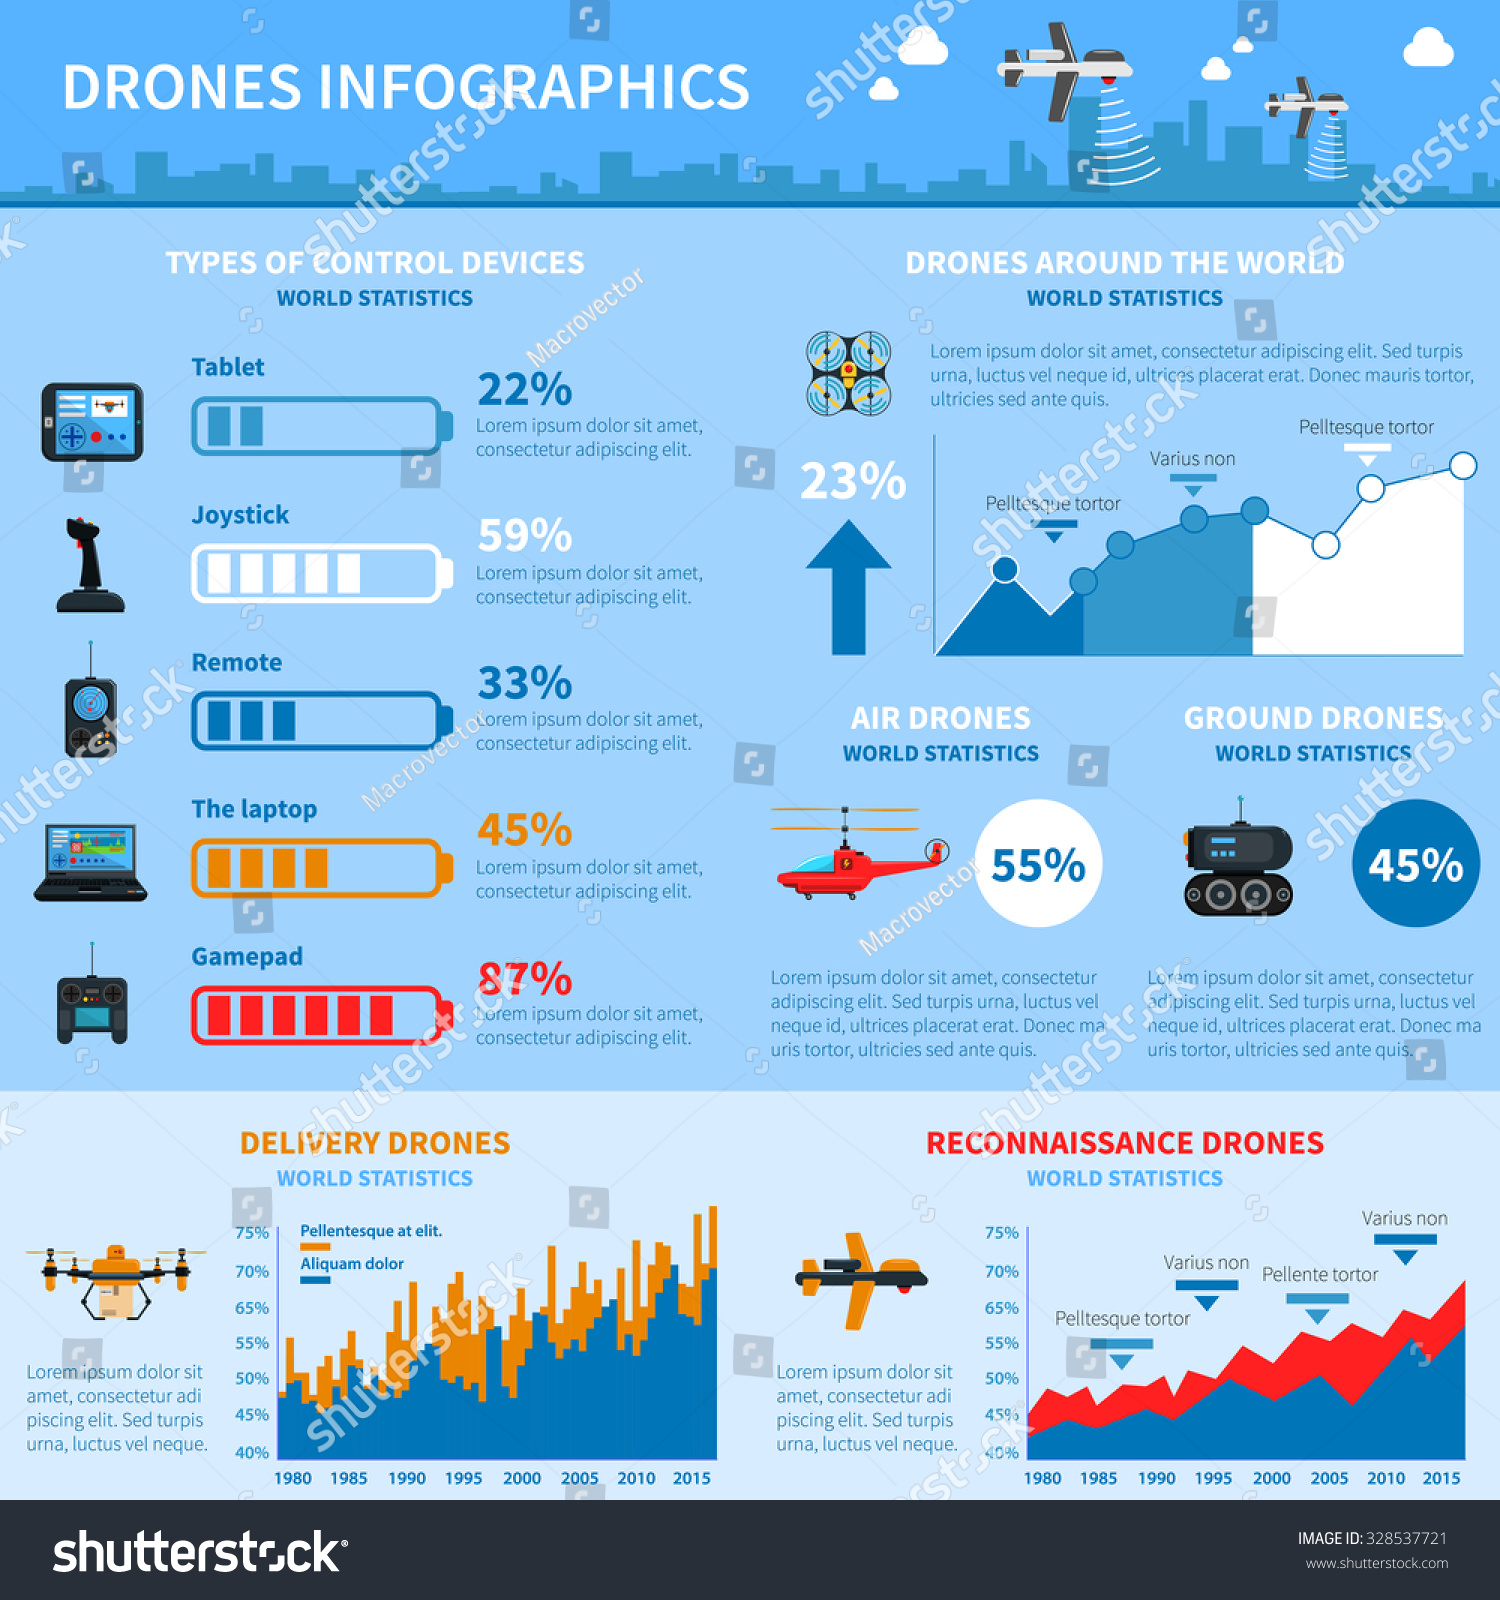 24 Interesting Drone Statistics and Facts (March 2018)